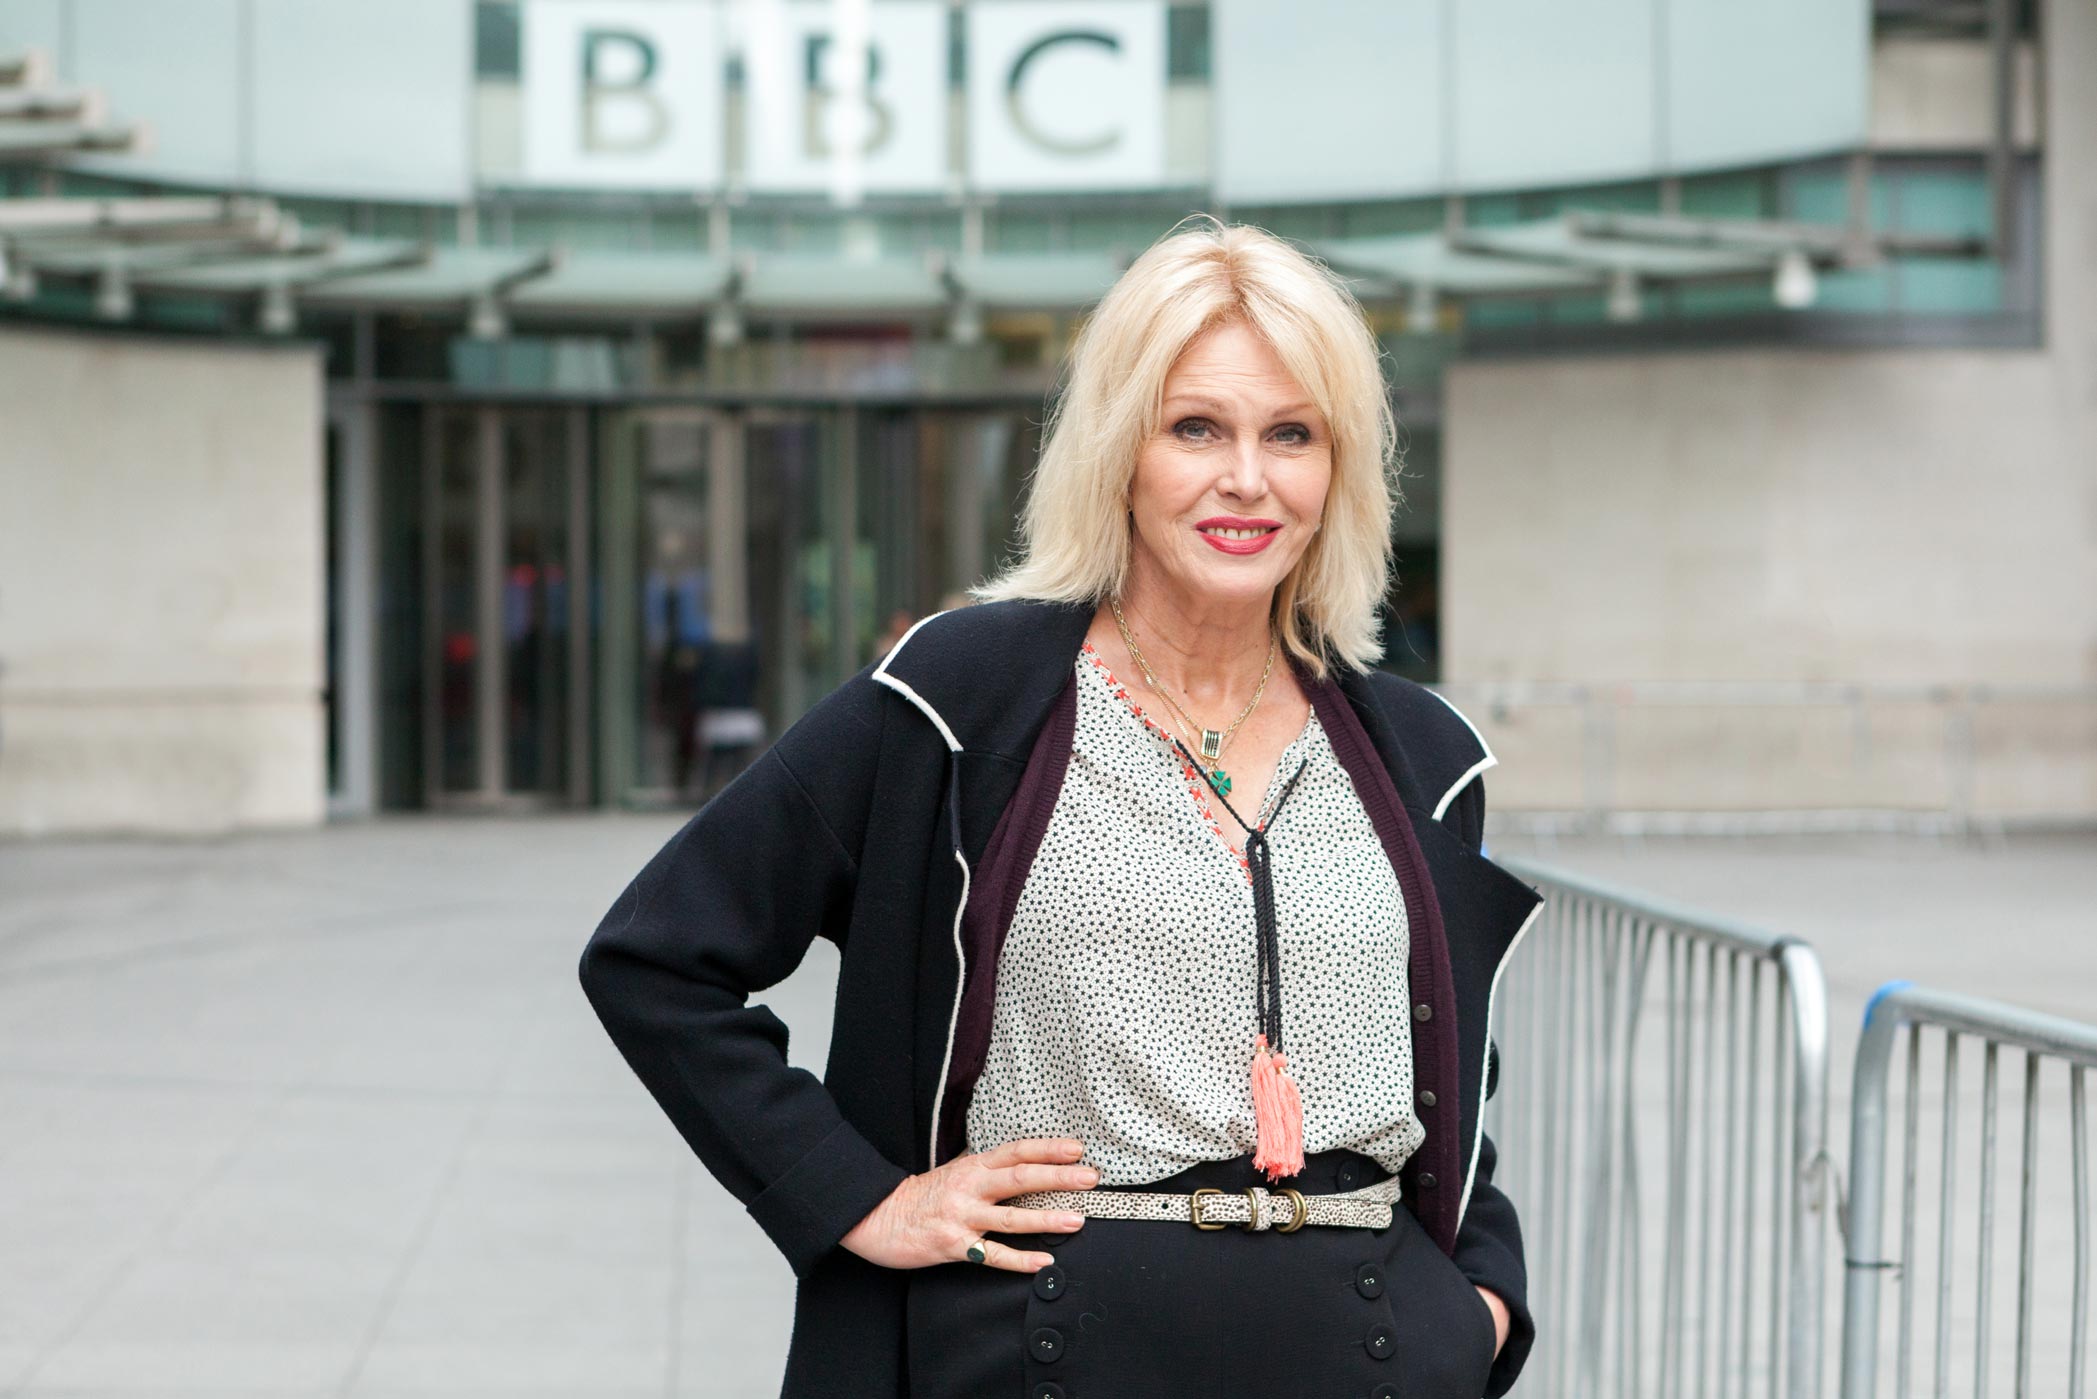 London corporate event photography. Joanna Lumley outside the BBC